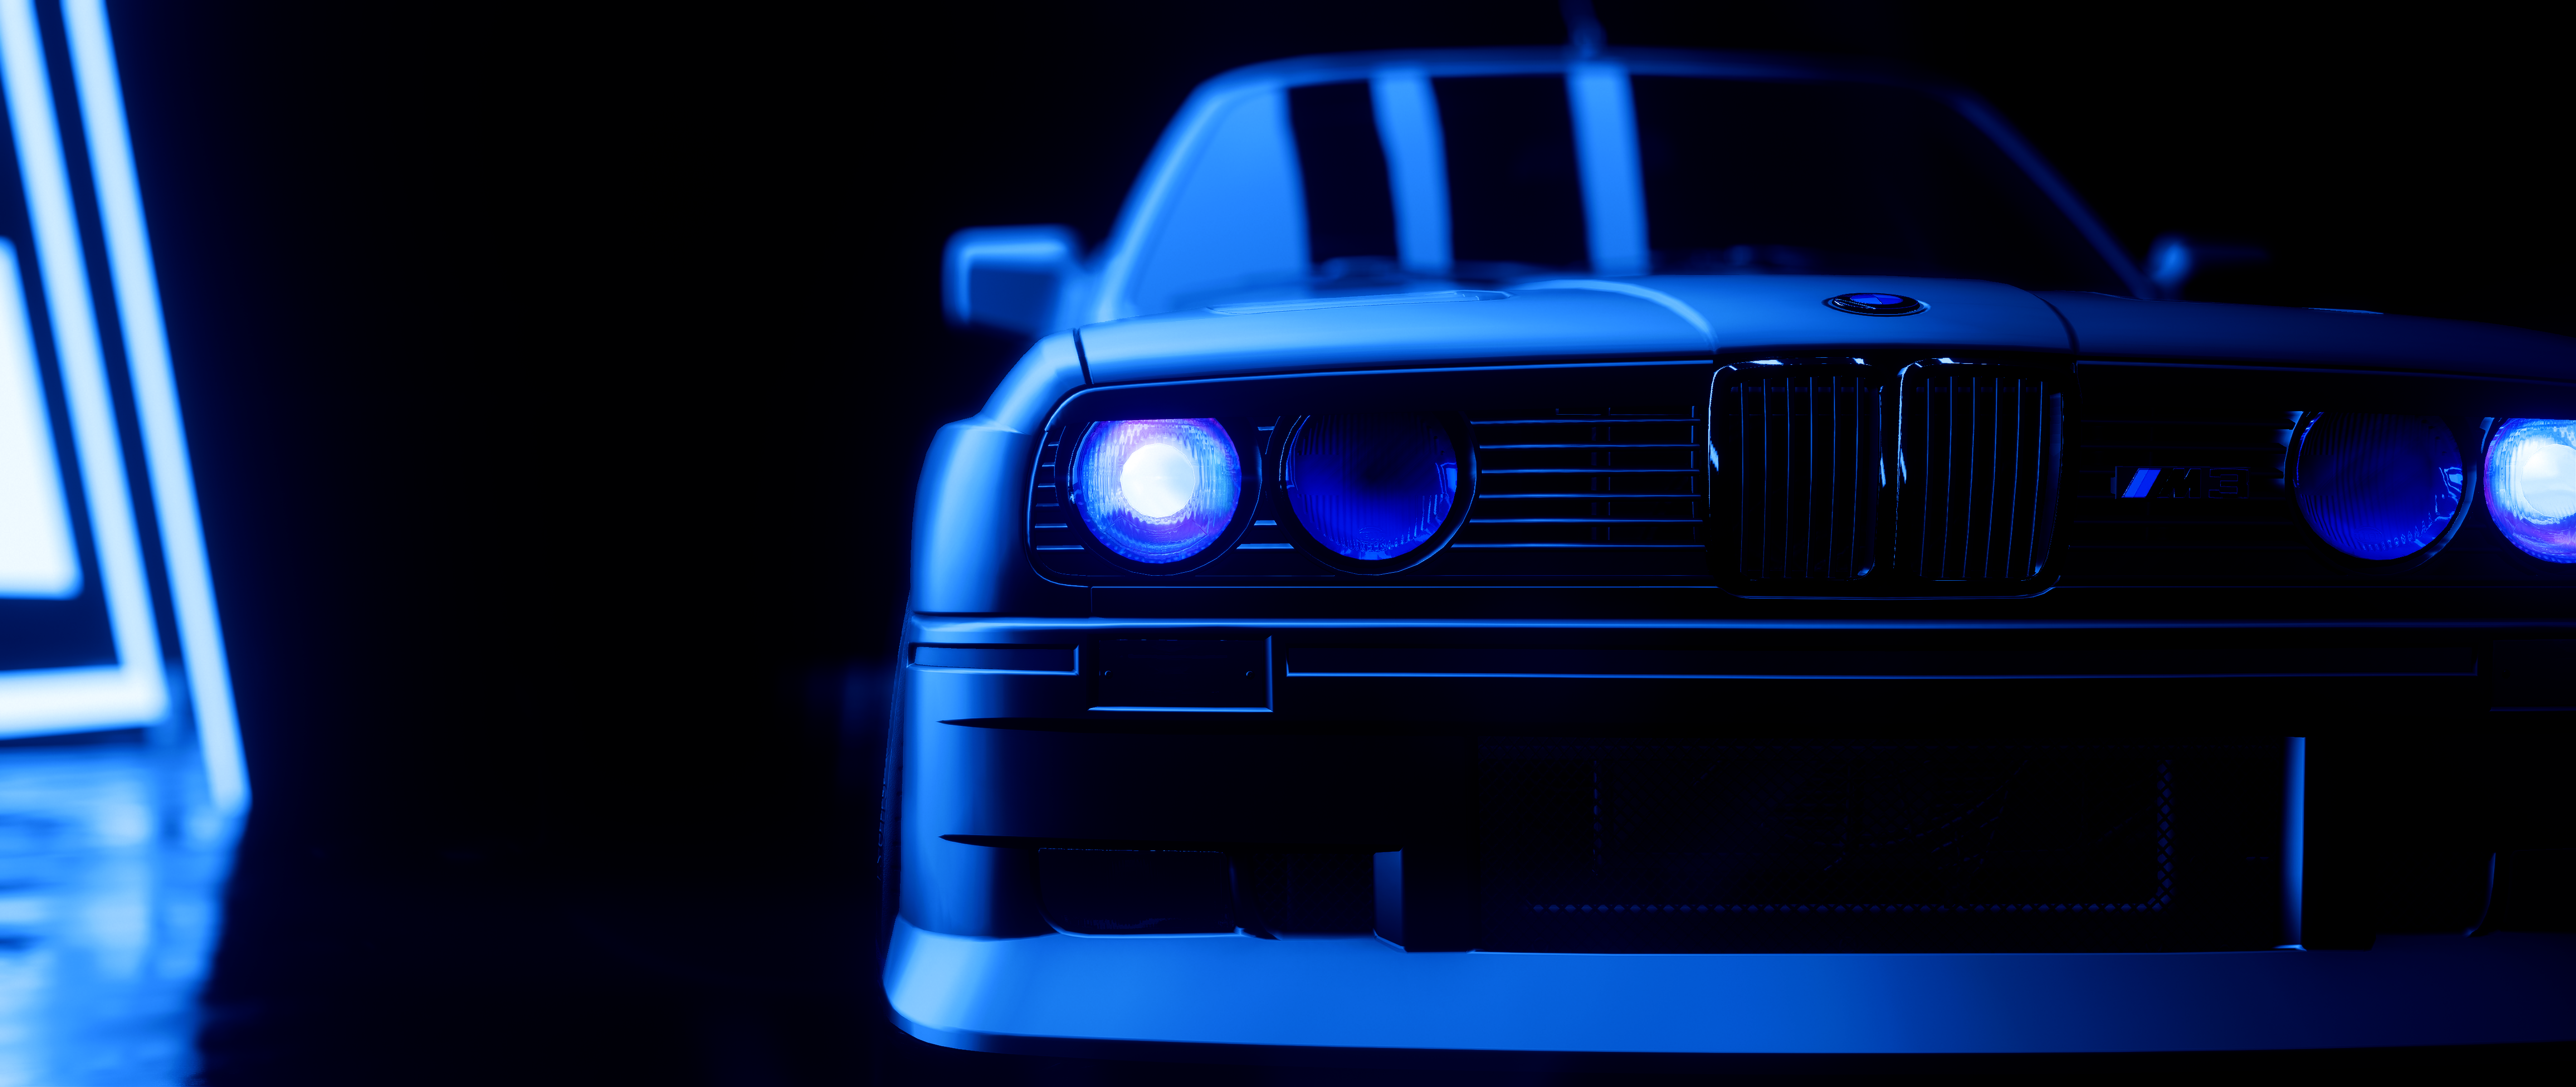 Need For Speed Heat Need For Speed BMW M BMW BMW M3 Digital Ultra High Res Car Vehicle 5120x2160